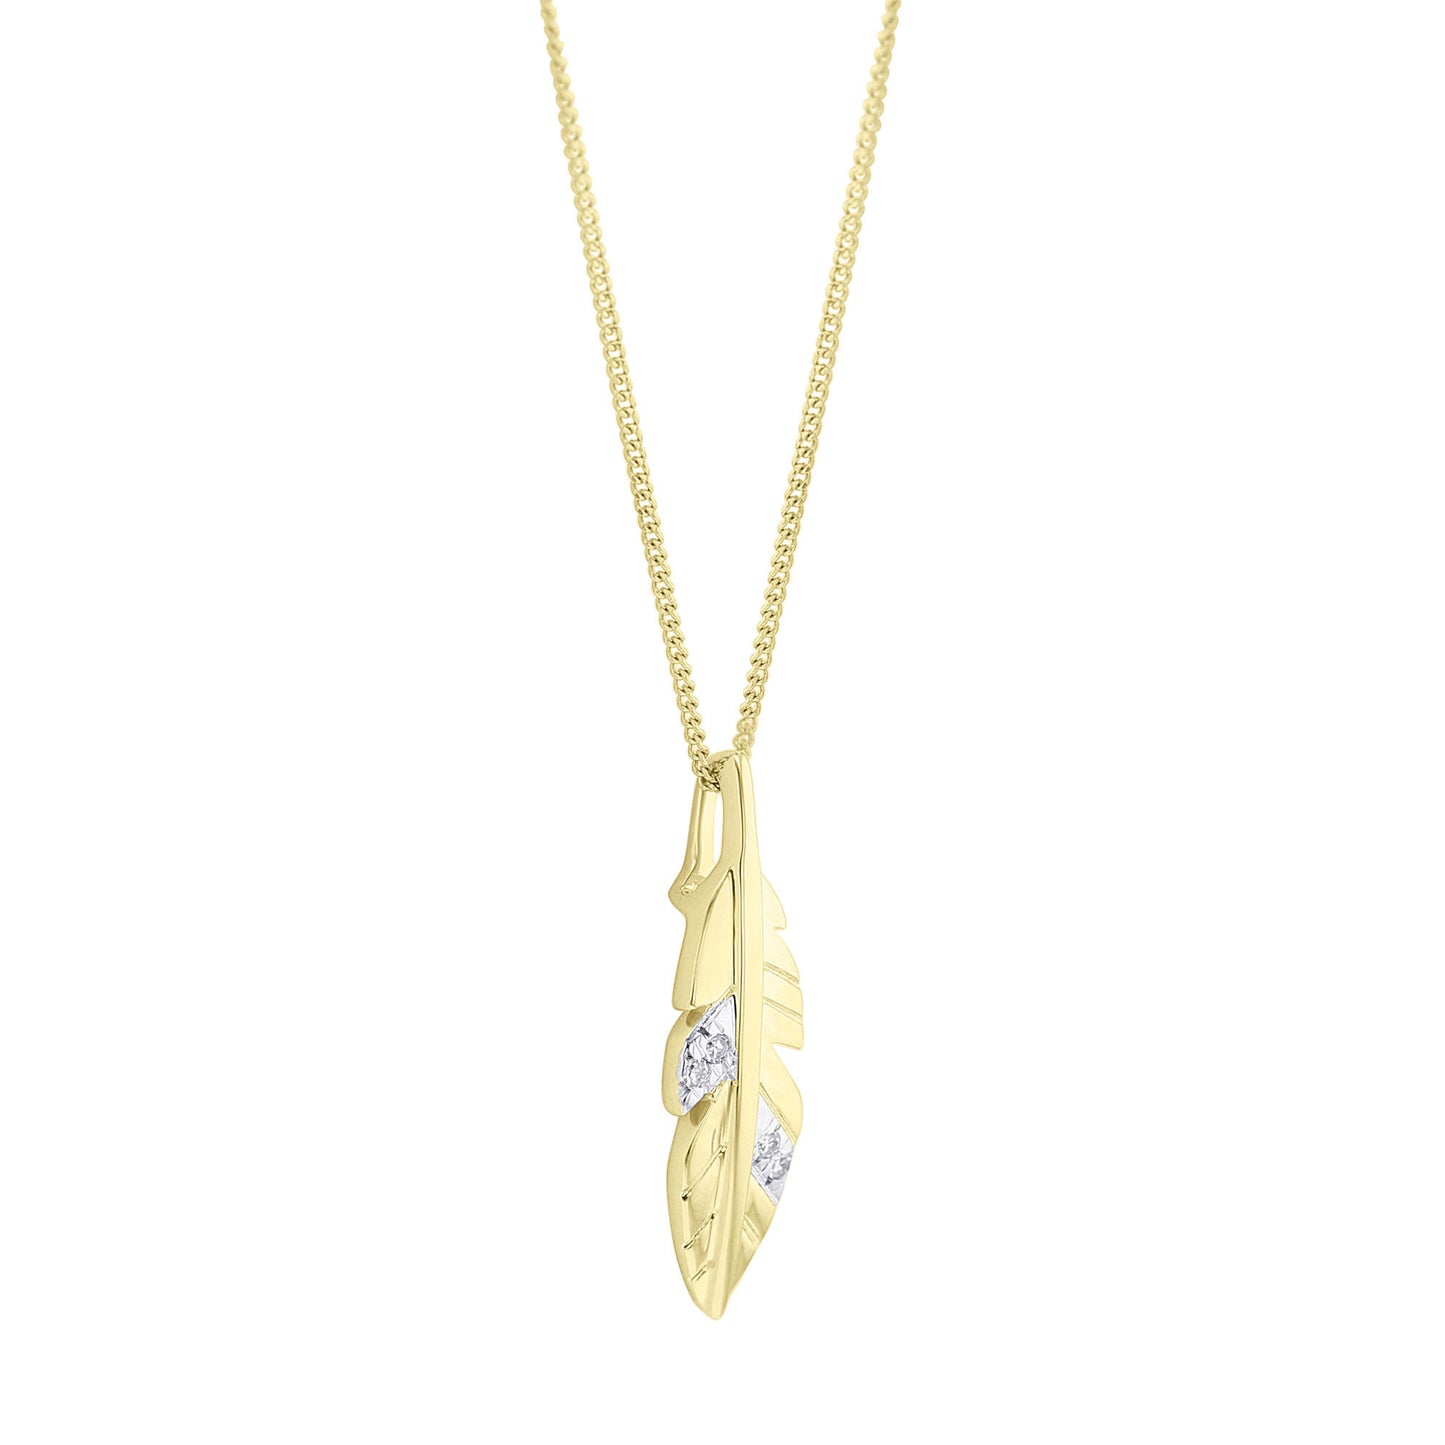 Lovely Gold Feather Diamond Necklace